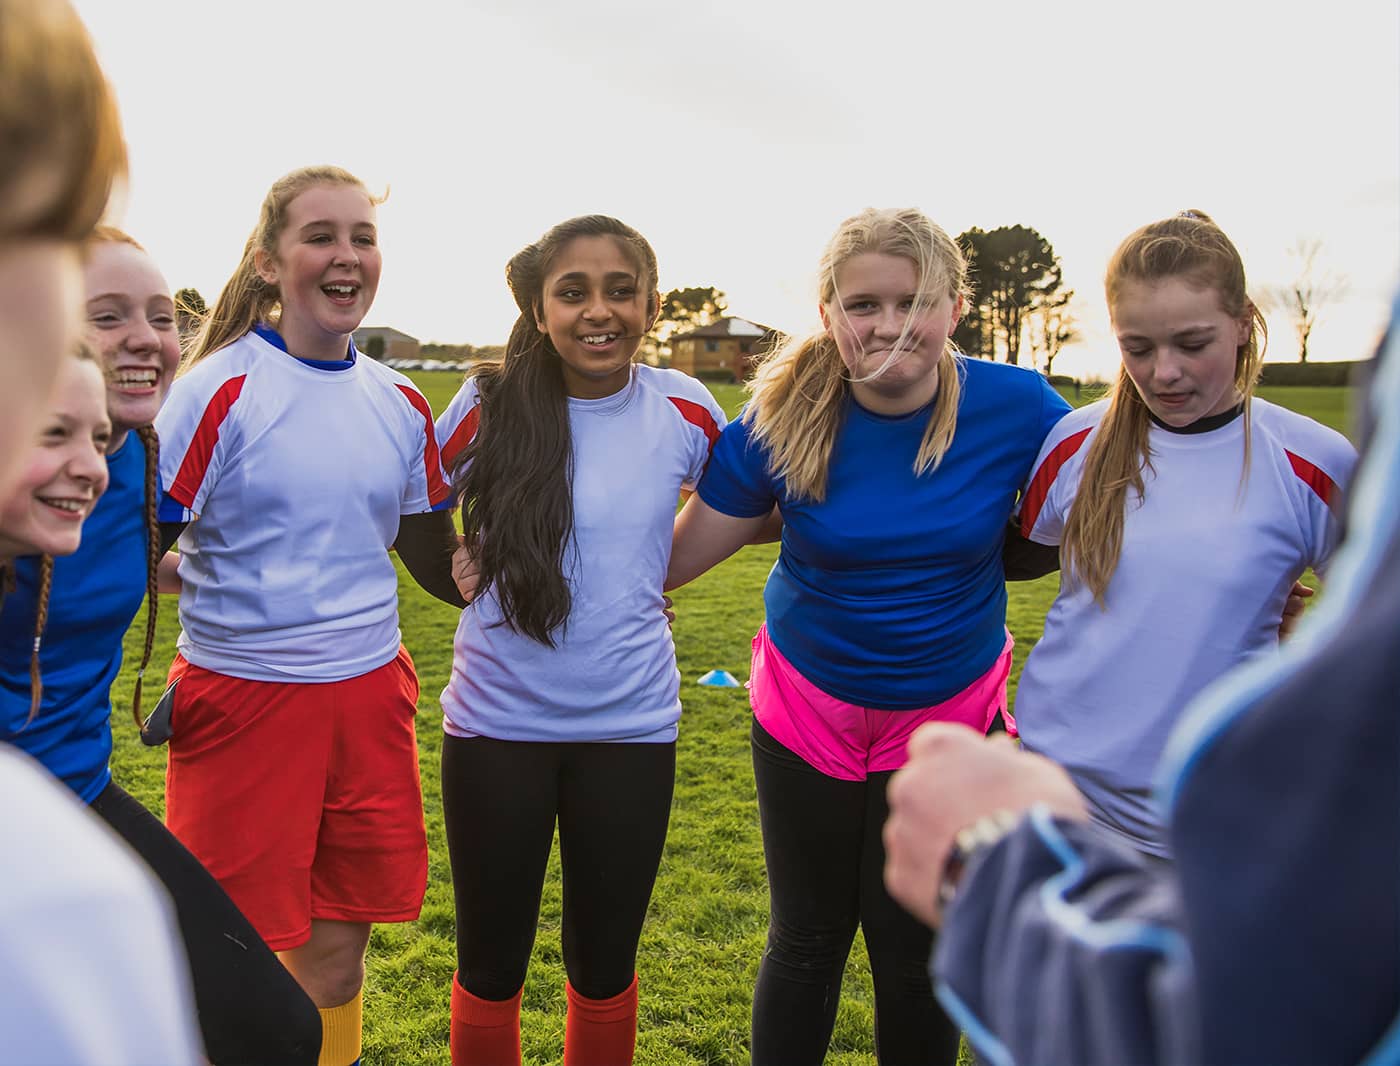 How (and Why) We Should Increase Girls' Participation in Sports